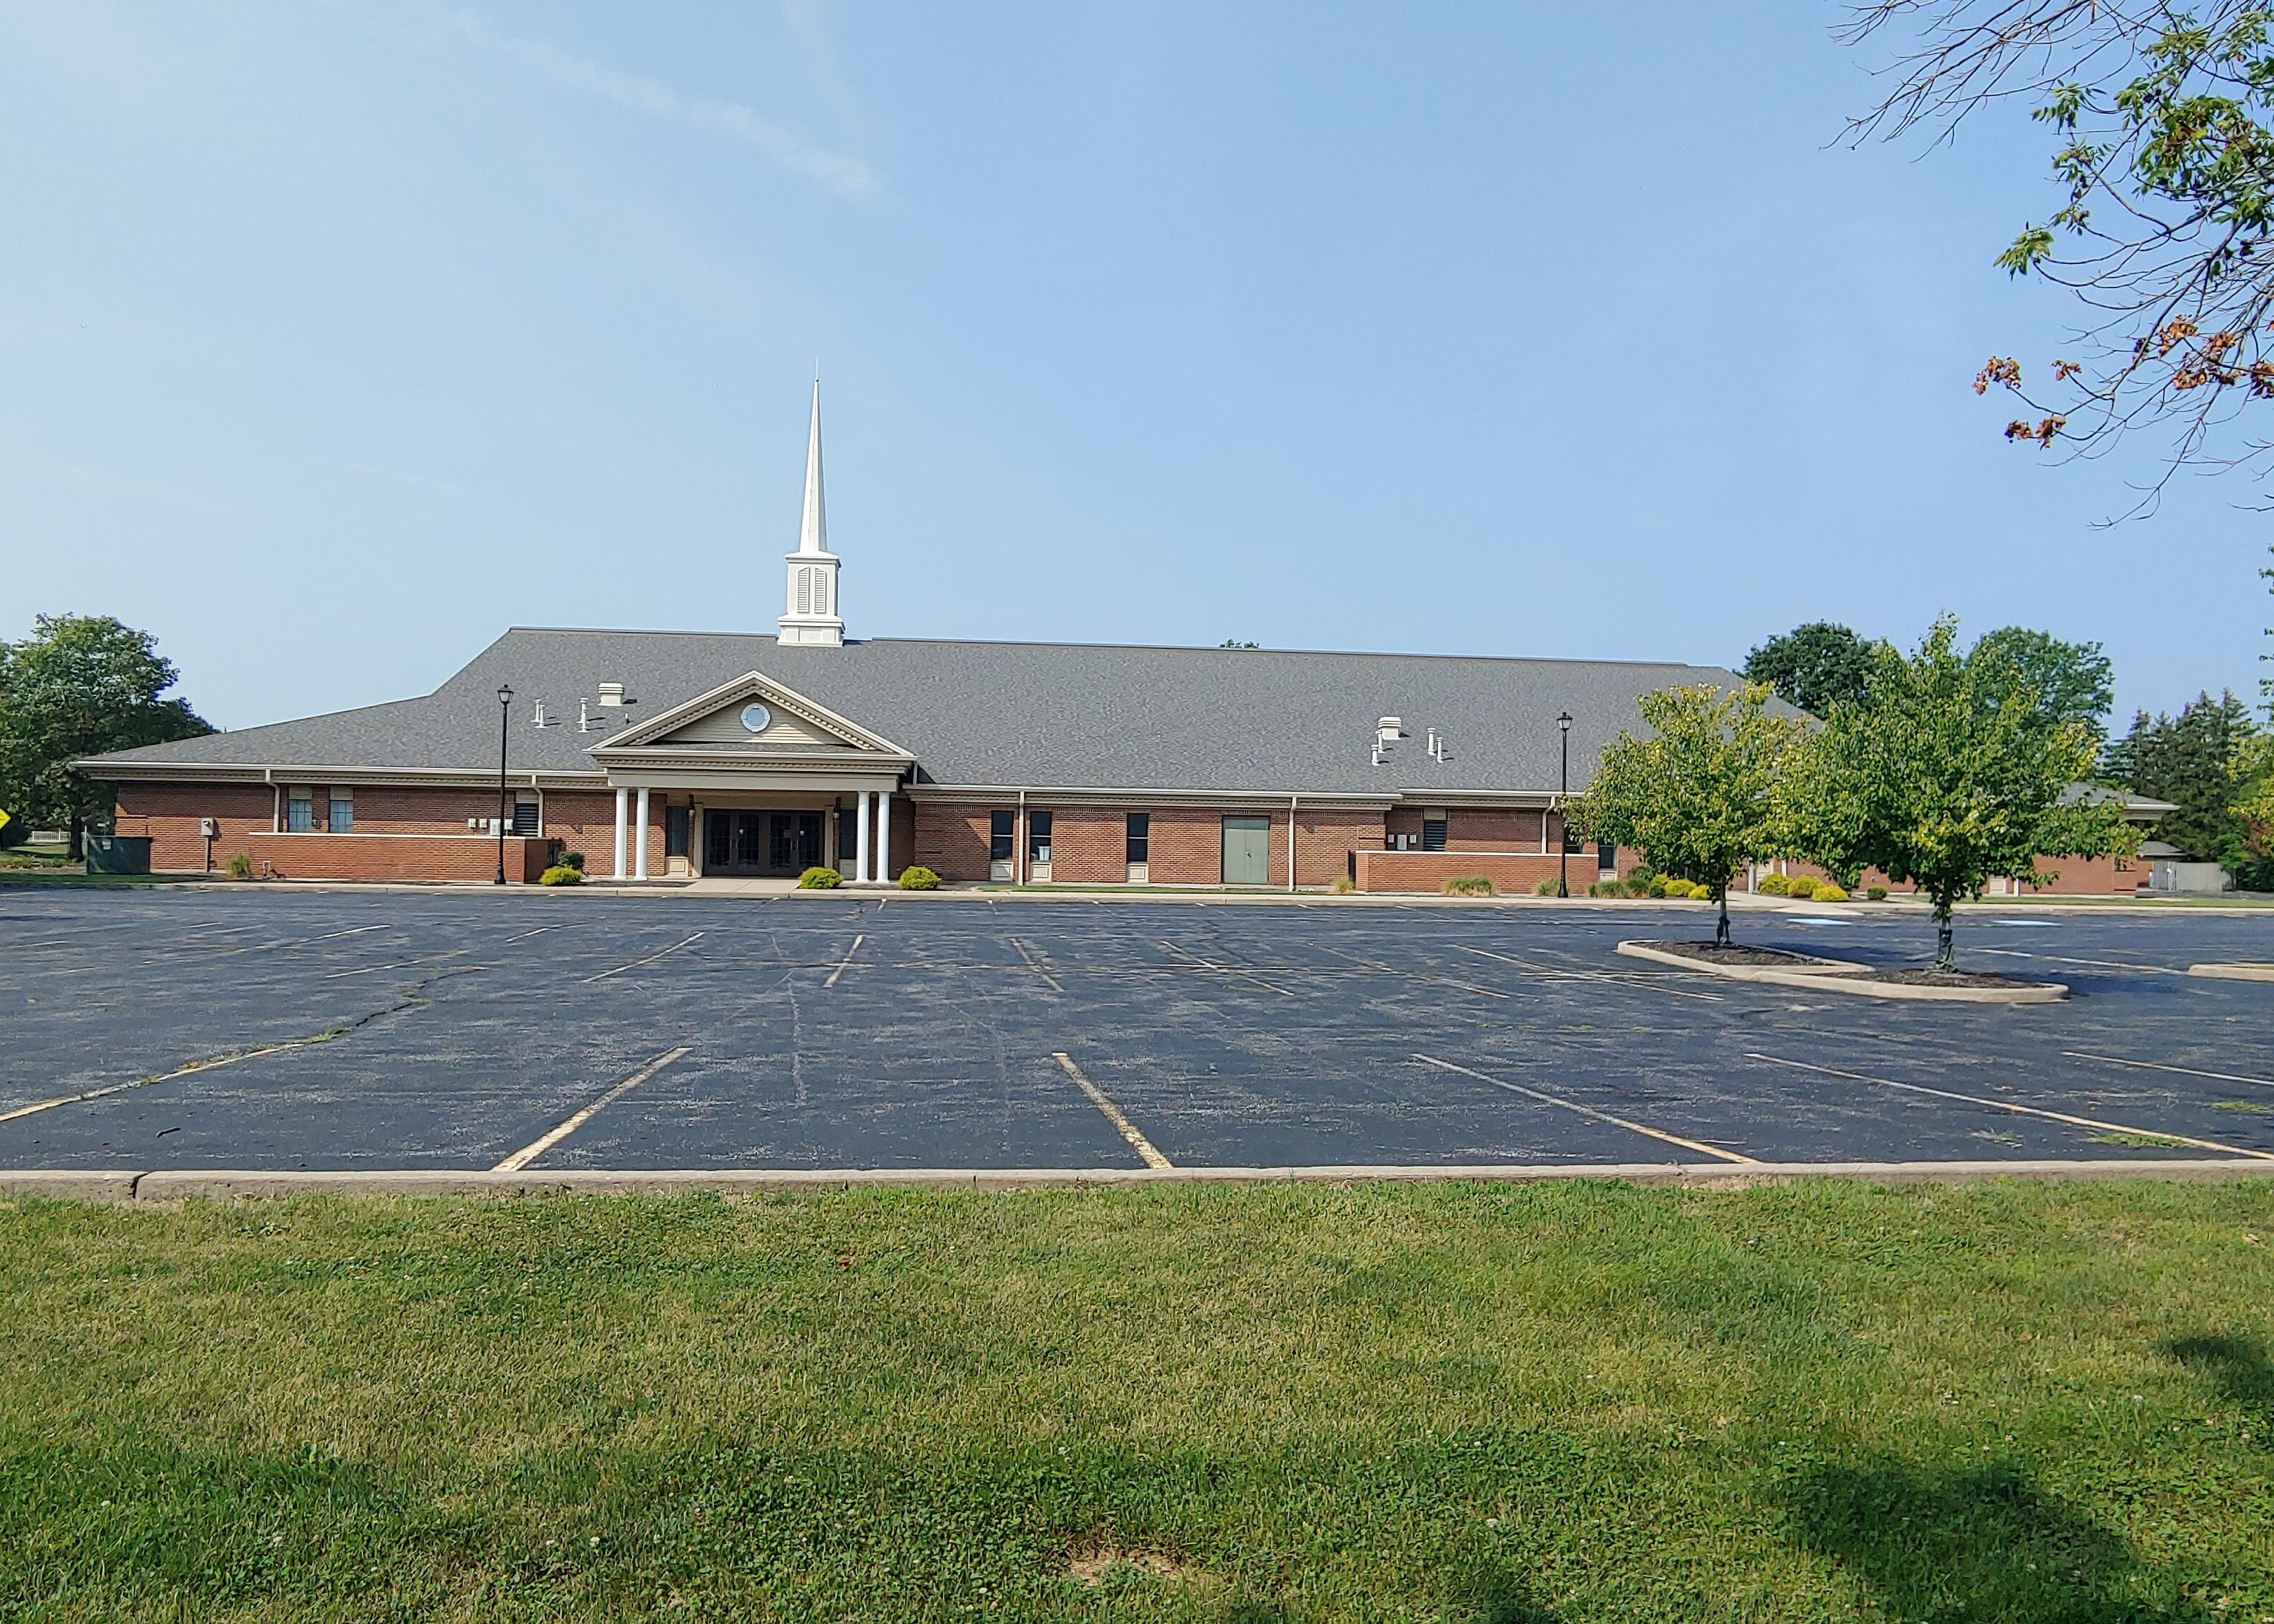 Perrysburg meetinghouse of The Church of Jesus Christ of Latter-day Saints located at 11050 Avenue Rd, Perrysburg, OH 43551.